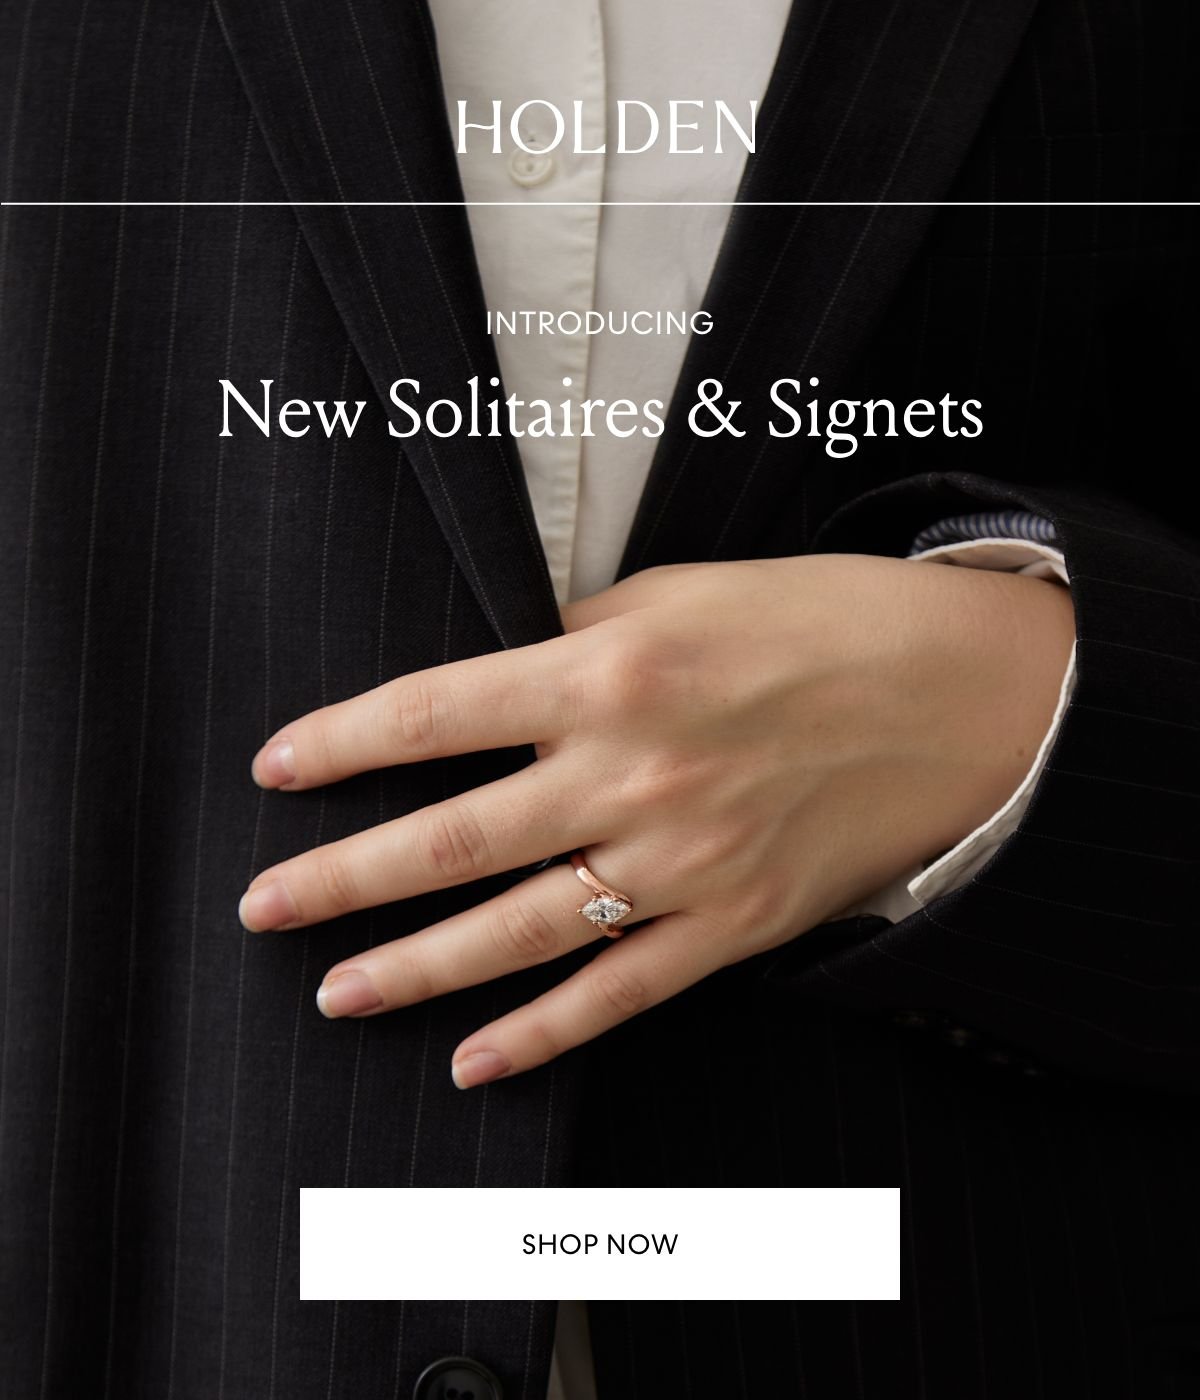 Introducing New Solitaires & Signets